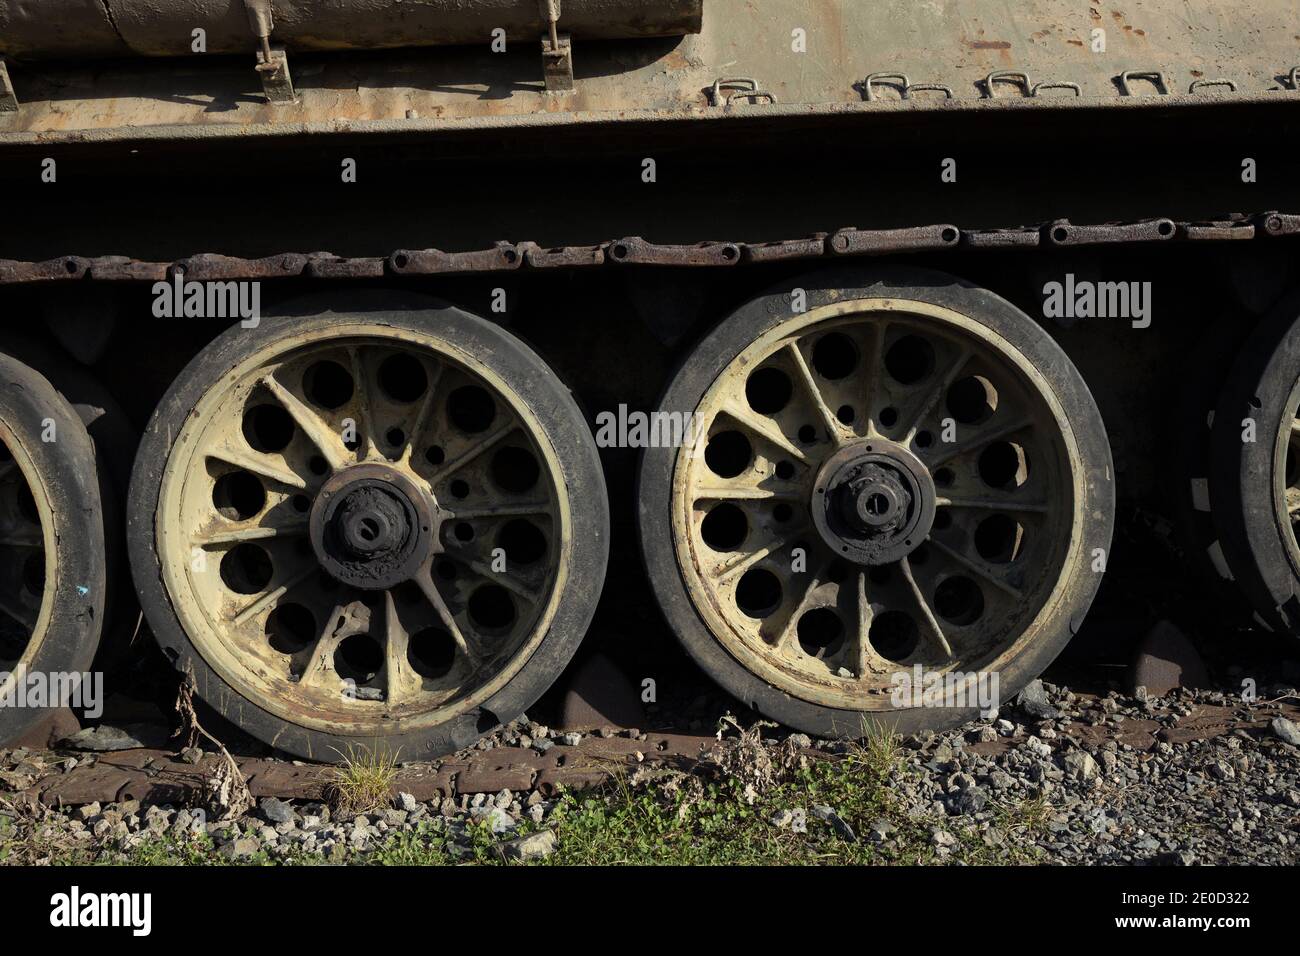 Detail of old aged military vehicle with continous track and wheels. Tank is corroded, rusty, tarnished and faded. Stock Photo